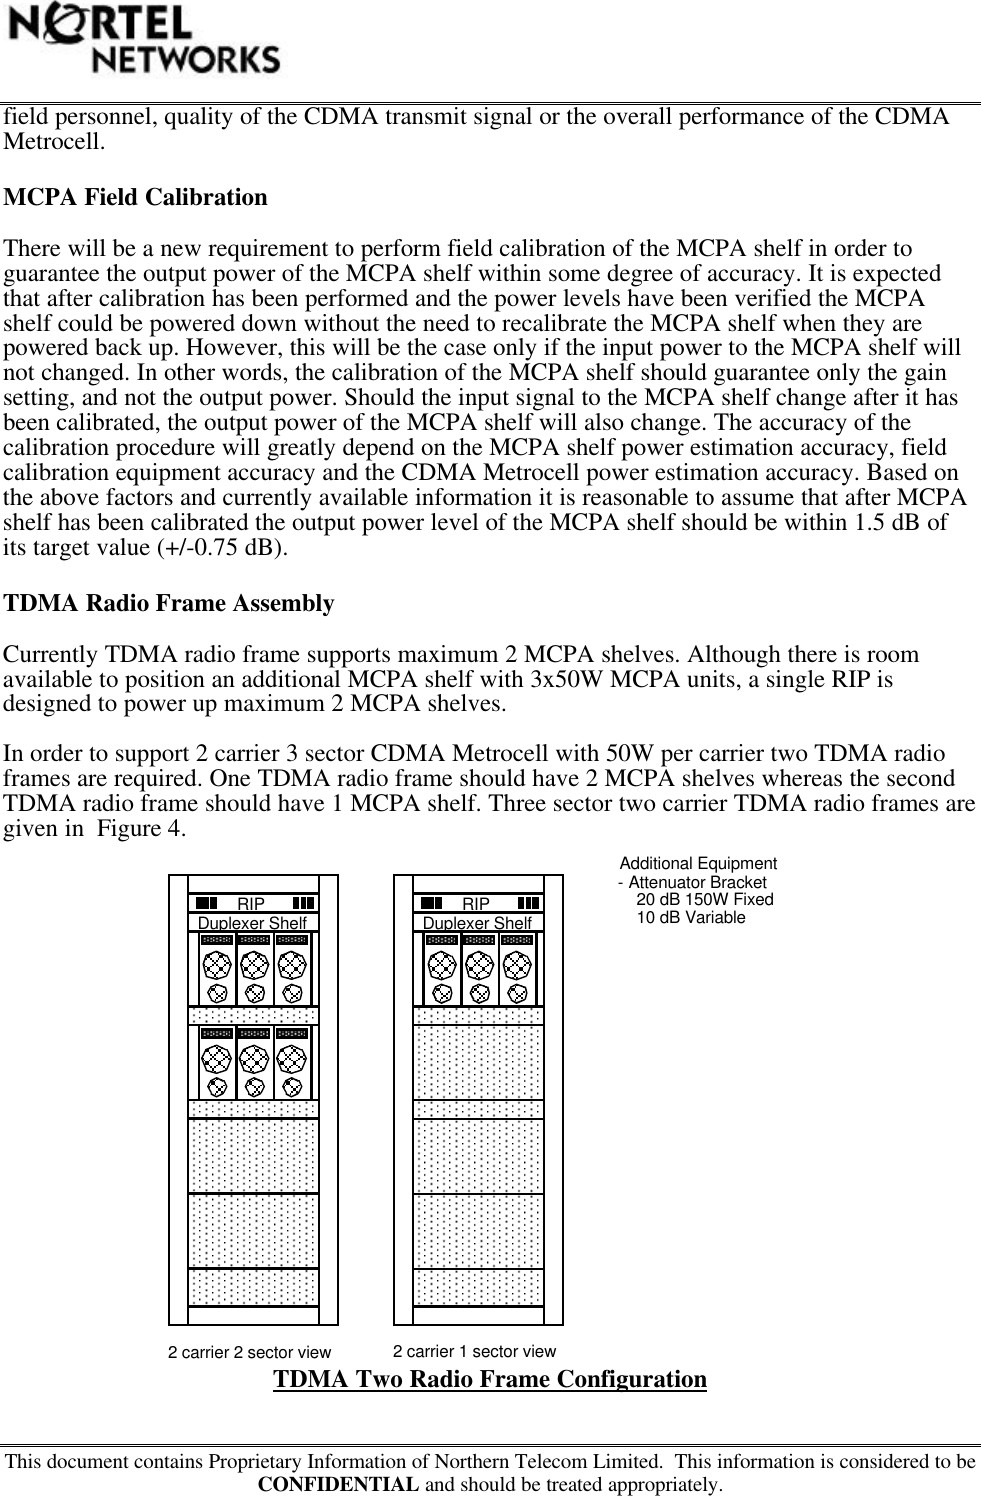 This document contains Proprietary Information of Northern Telecom Limited.  This information is considered to beCONFIDENTIAL and should be treated appropriately.field personnel, quality of the CDMA transmit signal or the overall performance of the CDMAMetrocell.MCPA Field CalibrationThere will be a new requirement to perform field calibration of the MCPA shelf in order toguarantee the output power of the MCPA shelf within some degree of accuracy. It is expectedthat after calibration has been performed and the power levels have been verified the MCPAshelf could be powered down without the need to recalibrate the MCPA shelf when they arepowered back up. However, this will be the case only if the input power to the MCPA shelf willnot changed. In other words, the calibration of the MCPA shelf should guarantee only the gainsetting, and not the output power. Should the input signal to the MCPA shelf change after it hasbeen calibrated, the output power of the MCPA shelf will also change. The accuracy of thecalibration procedure will greatly depend on the MCPA shelf power estimation accuracy, fieldcalibration equipment accuracy and the CDMA Metrocell power estimation accuracy. Based onthe above factors and currently available information it is reasonable to assume that after MCPAshelf has been calibrated the output power level of the MCPA shelf should be within 1.5 dB ofits target value (+/-0.75 dB).TDMA Radio Frame AssemblyCurrently TDMA radio frame supports maximum 2 MCPA shelves. Although there is roomavailable to position an additional MCPA shelf with 3x50W MCPA units, a single RIP isdesigned to power up maximum 2 MCPA shelves.In order to support 2 carrier 3 sector CDMA Metrocell with 50W per carrier two TDMA radioframes are required. One TDMA radio frame should have 2 MCPA shelves whereas the secondTDMA radio frame should have 1 MCPA shelf. Three sector two carrier TDMA radio frames aregiven in  Figure 4.TDMA Two Radio Frame ConfigurationRIPAdditional Equipment- Attenuator BracketDuplexer Shelf RIPDuplexer Shelf    20 dB 150W Fixed    10 dB Variable2 carrier 2 sector view2 carrier 1 sector view